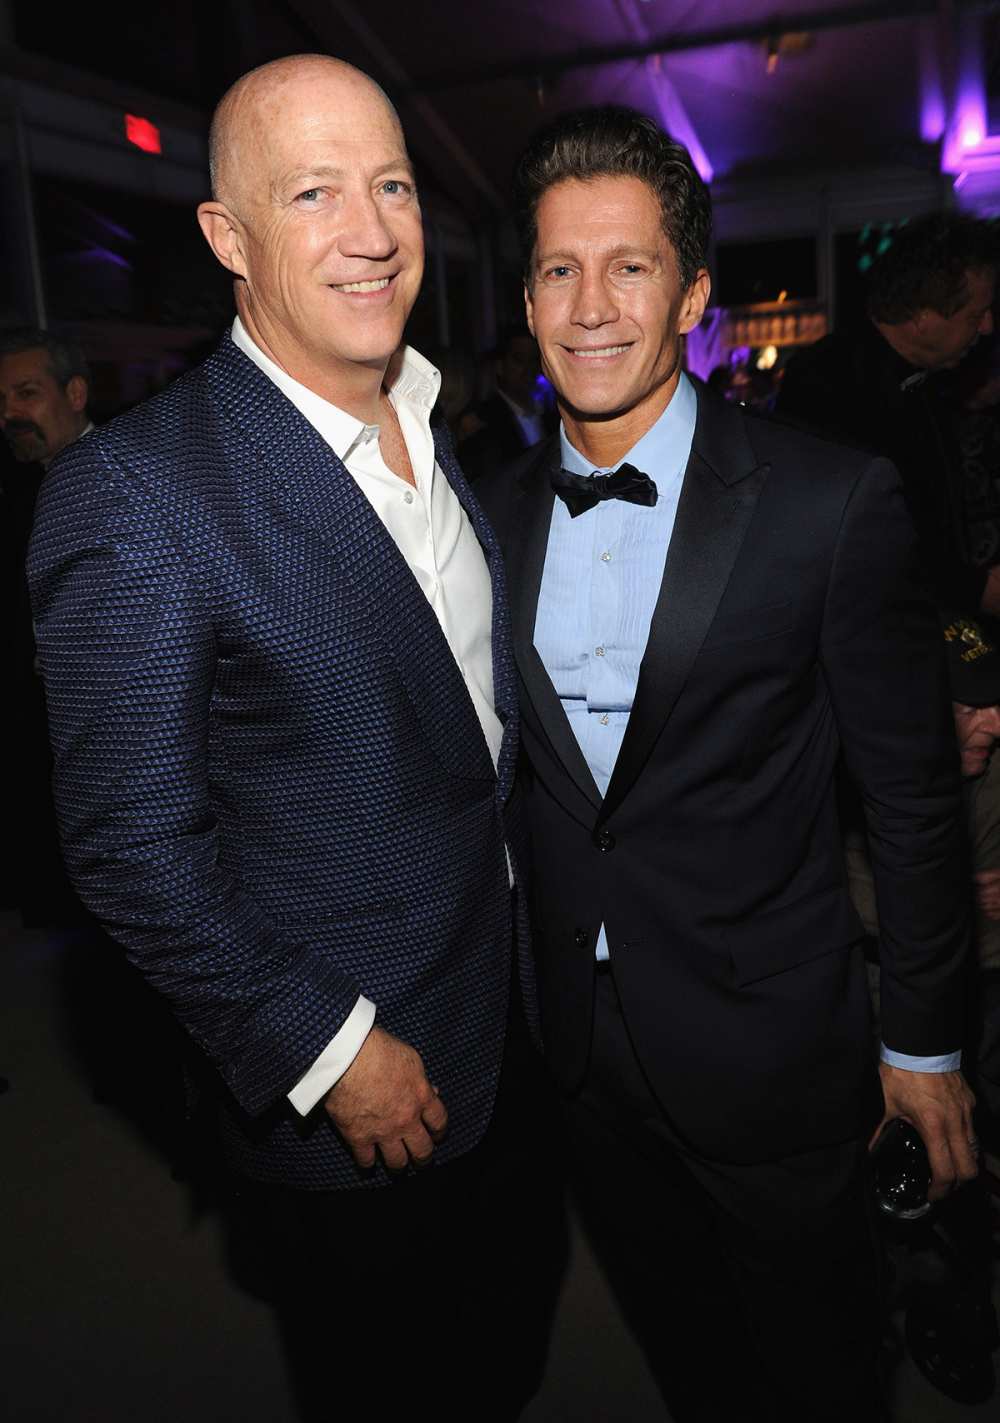 Bryan Lourd (L) and Bruce Bozzie (R) attend the 2014 Vanity Fair Oscar Party Hosted By Graydon Carter on March 2, 2014 in West Hollywood, California